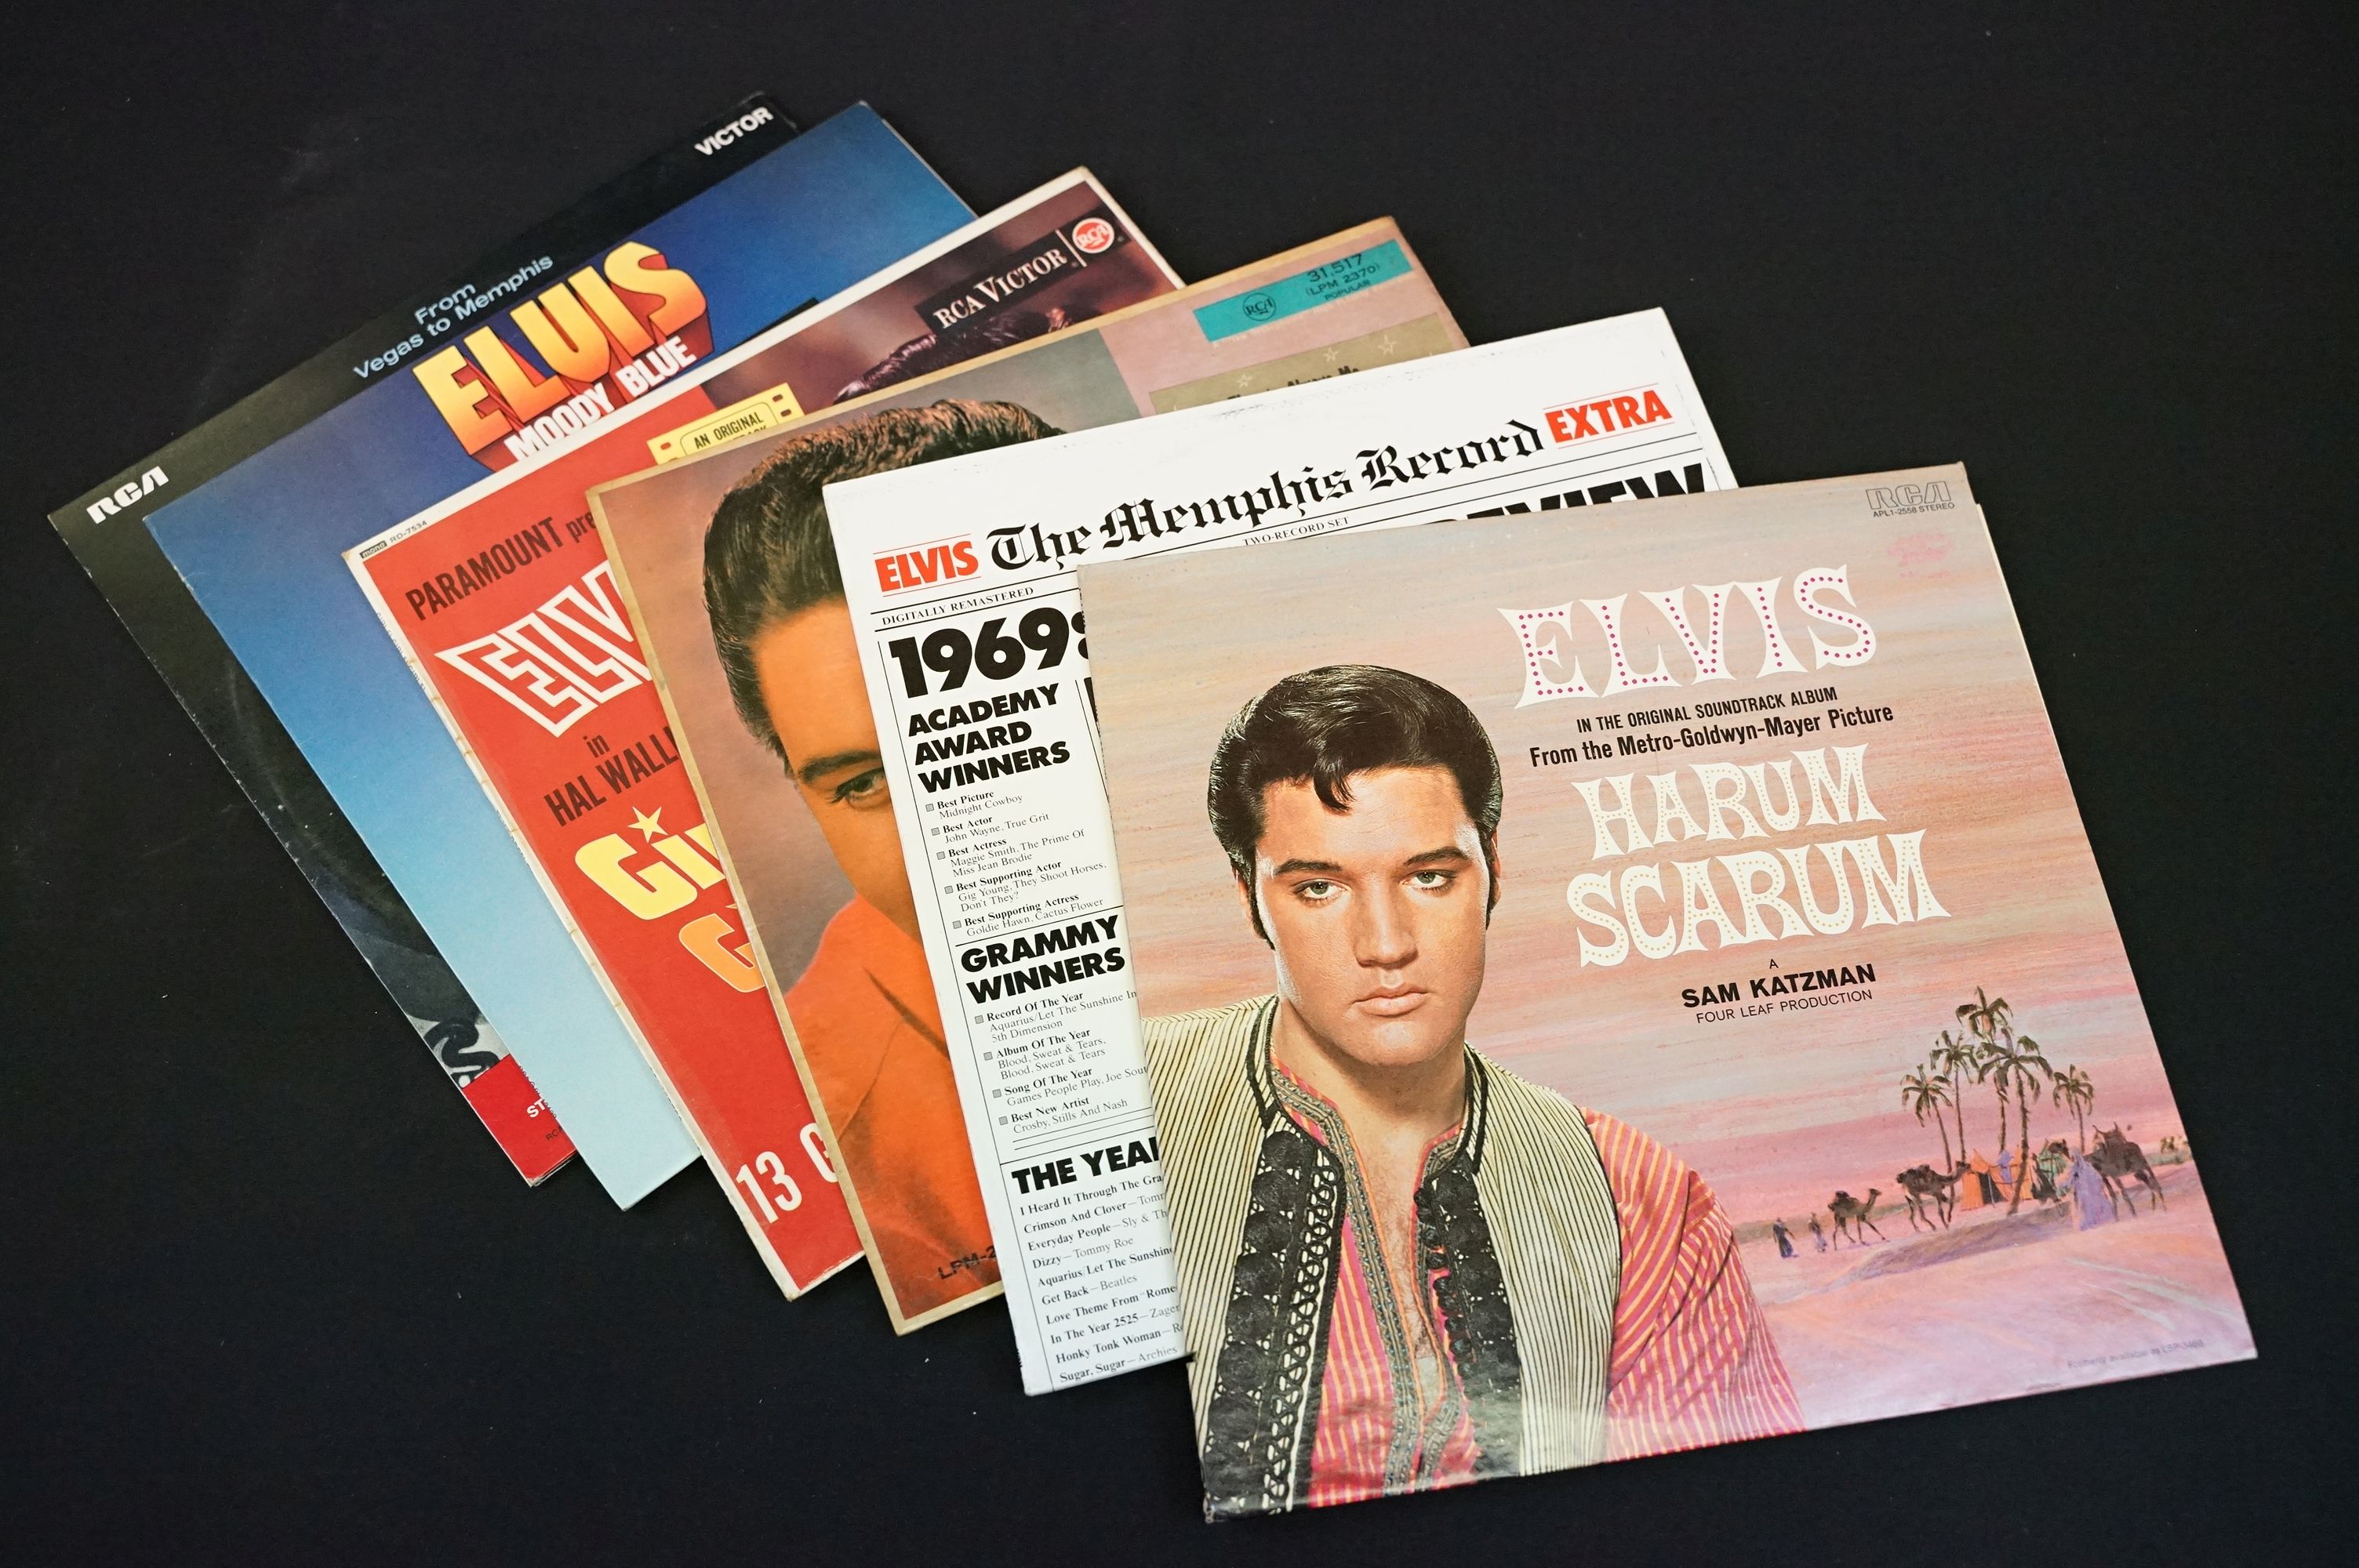 Vinyl - Over 80 Elvis Presley LPs spanning his career including foreign pressings, ltd editions - Image 2 of 5